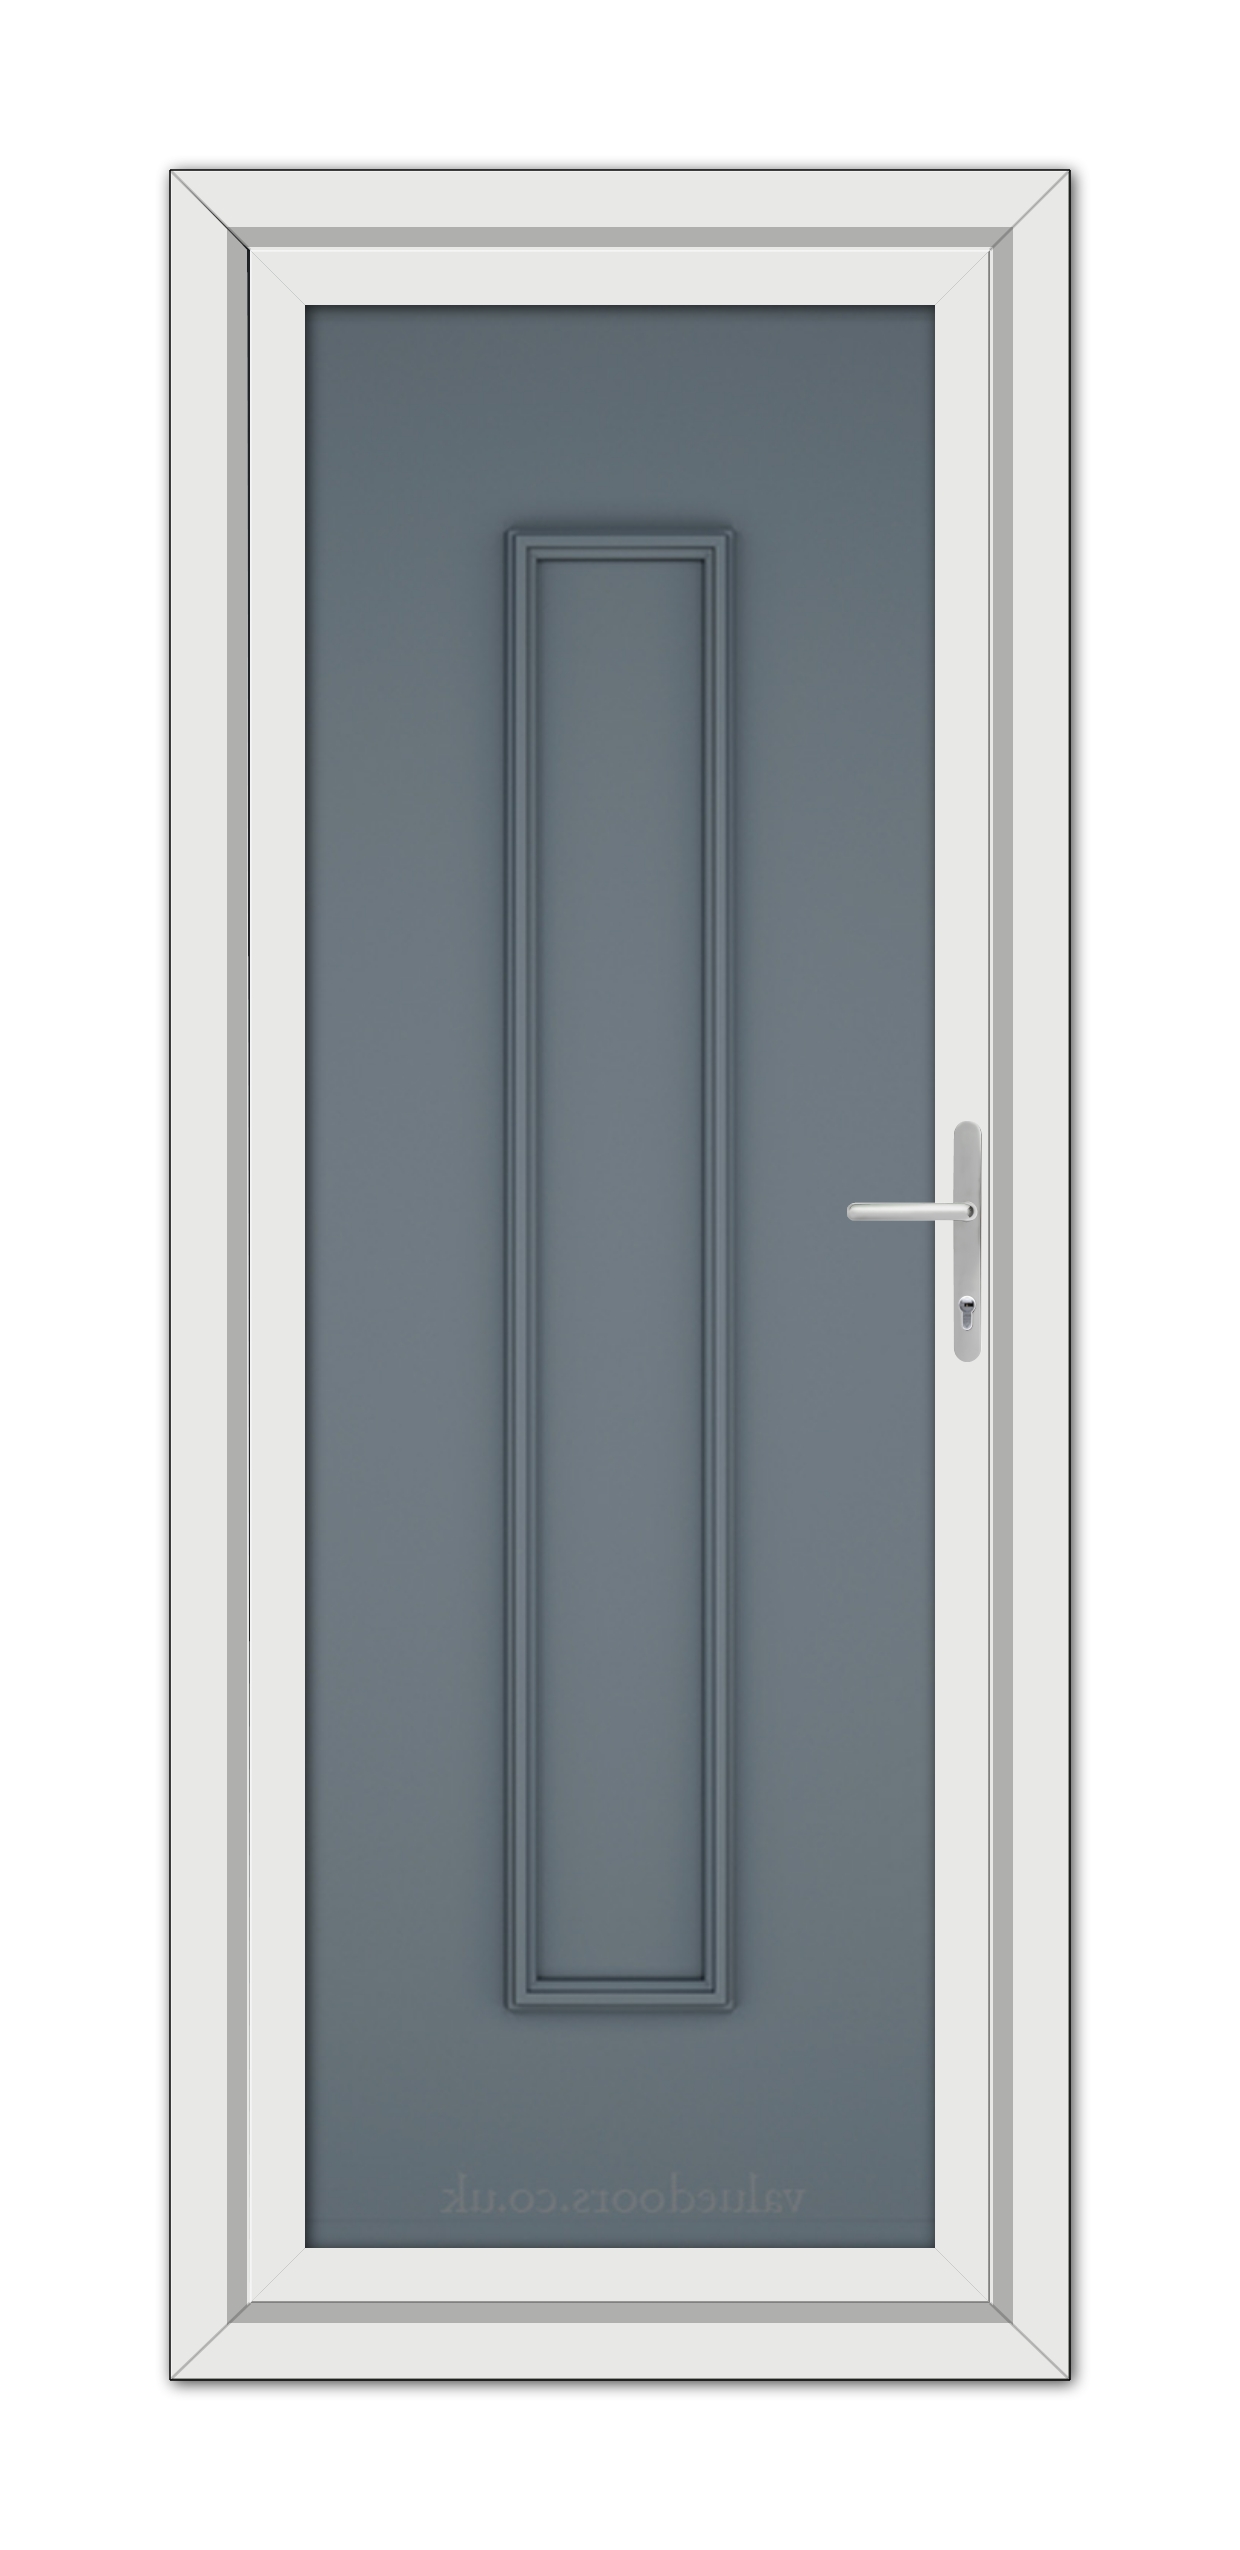 A Slate Grey Rome Solid uPVC Door with a glass panel.